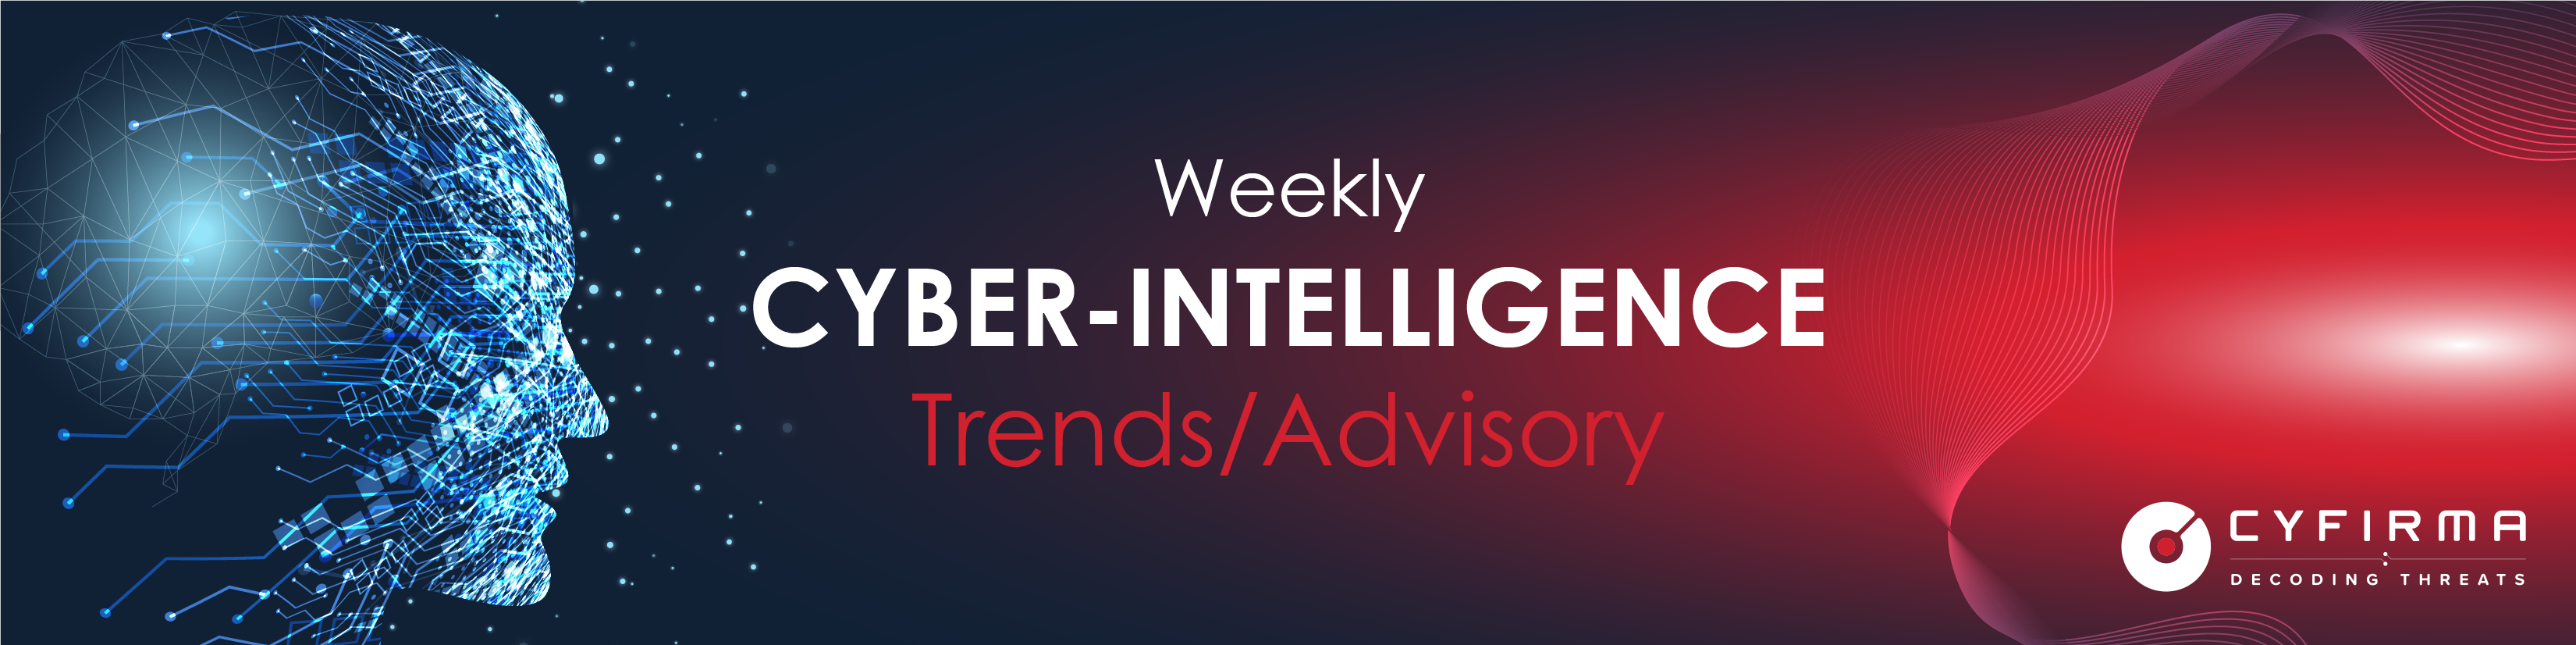 Weekly Cyber-Intelligence Trends and Advisory – 9 Apr 2022